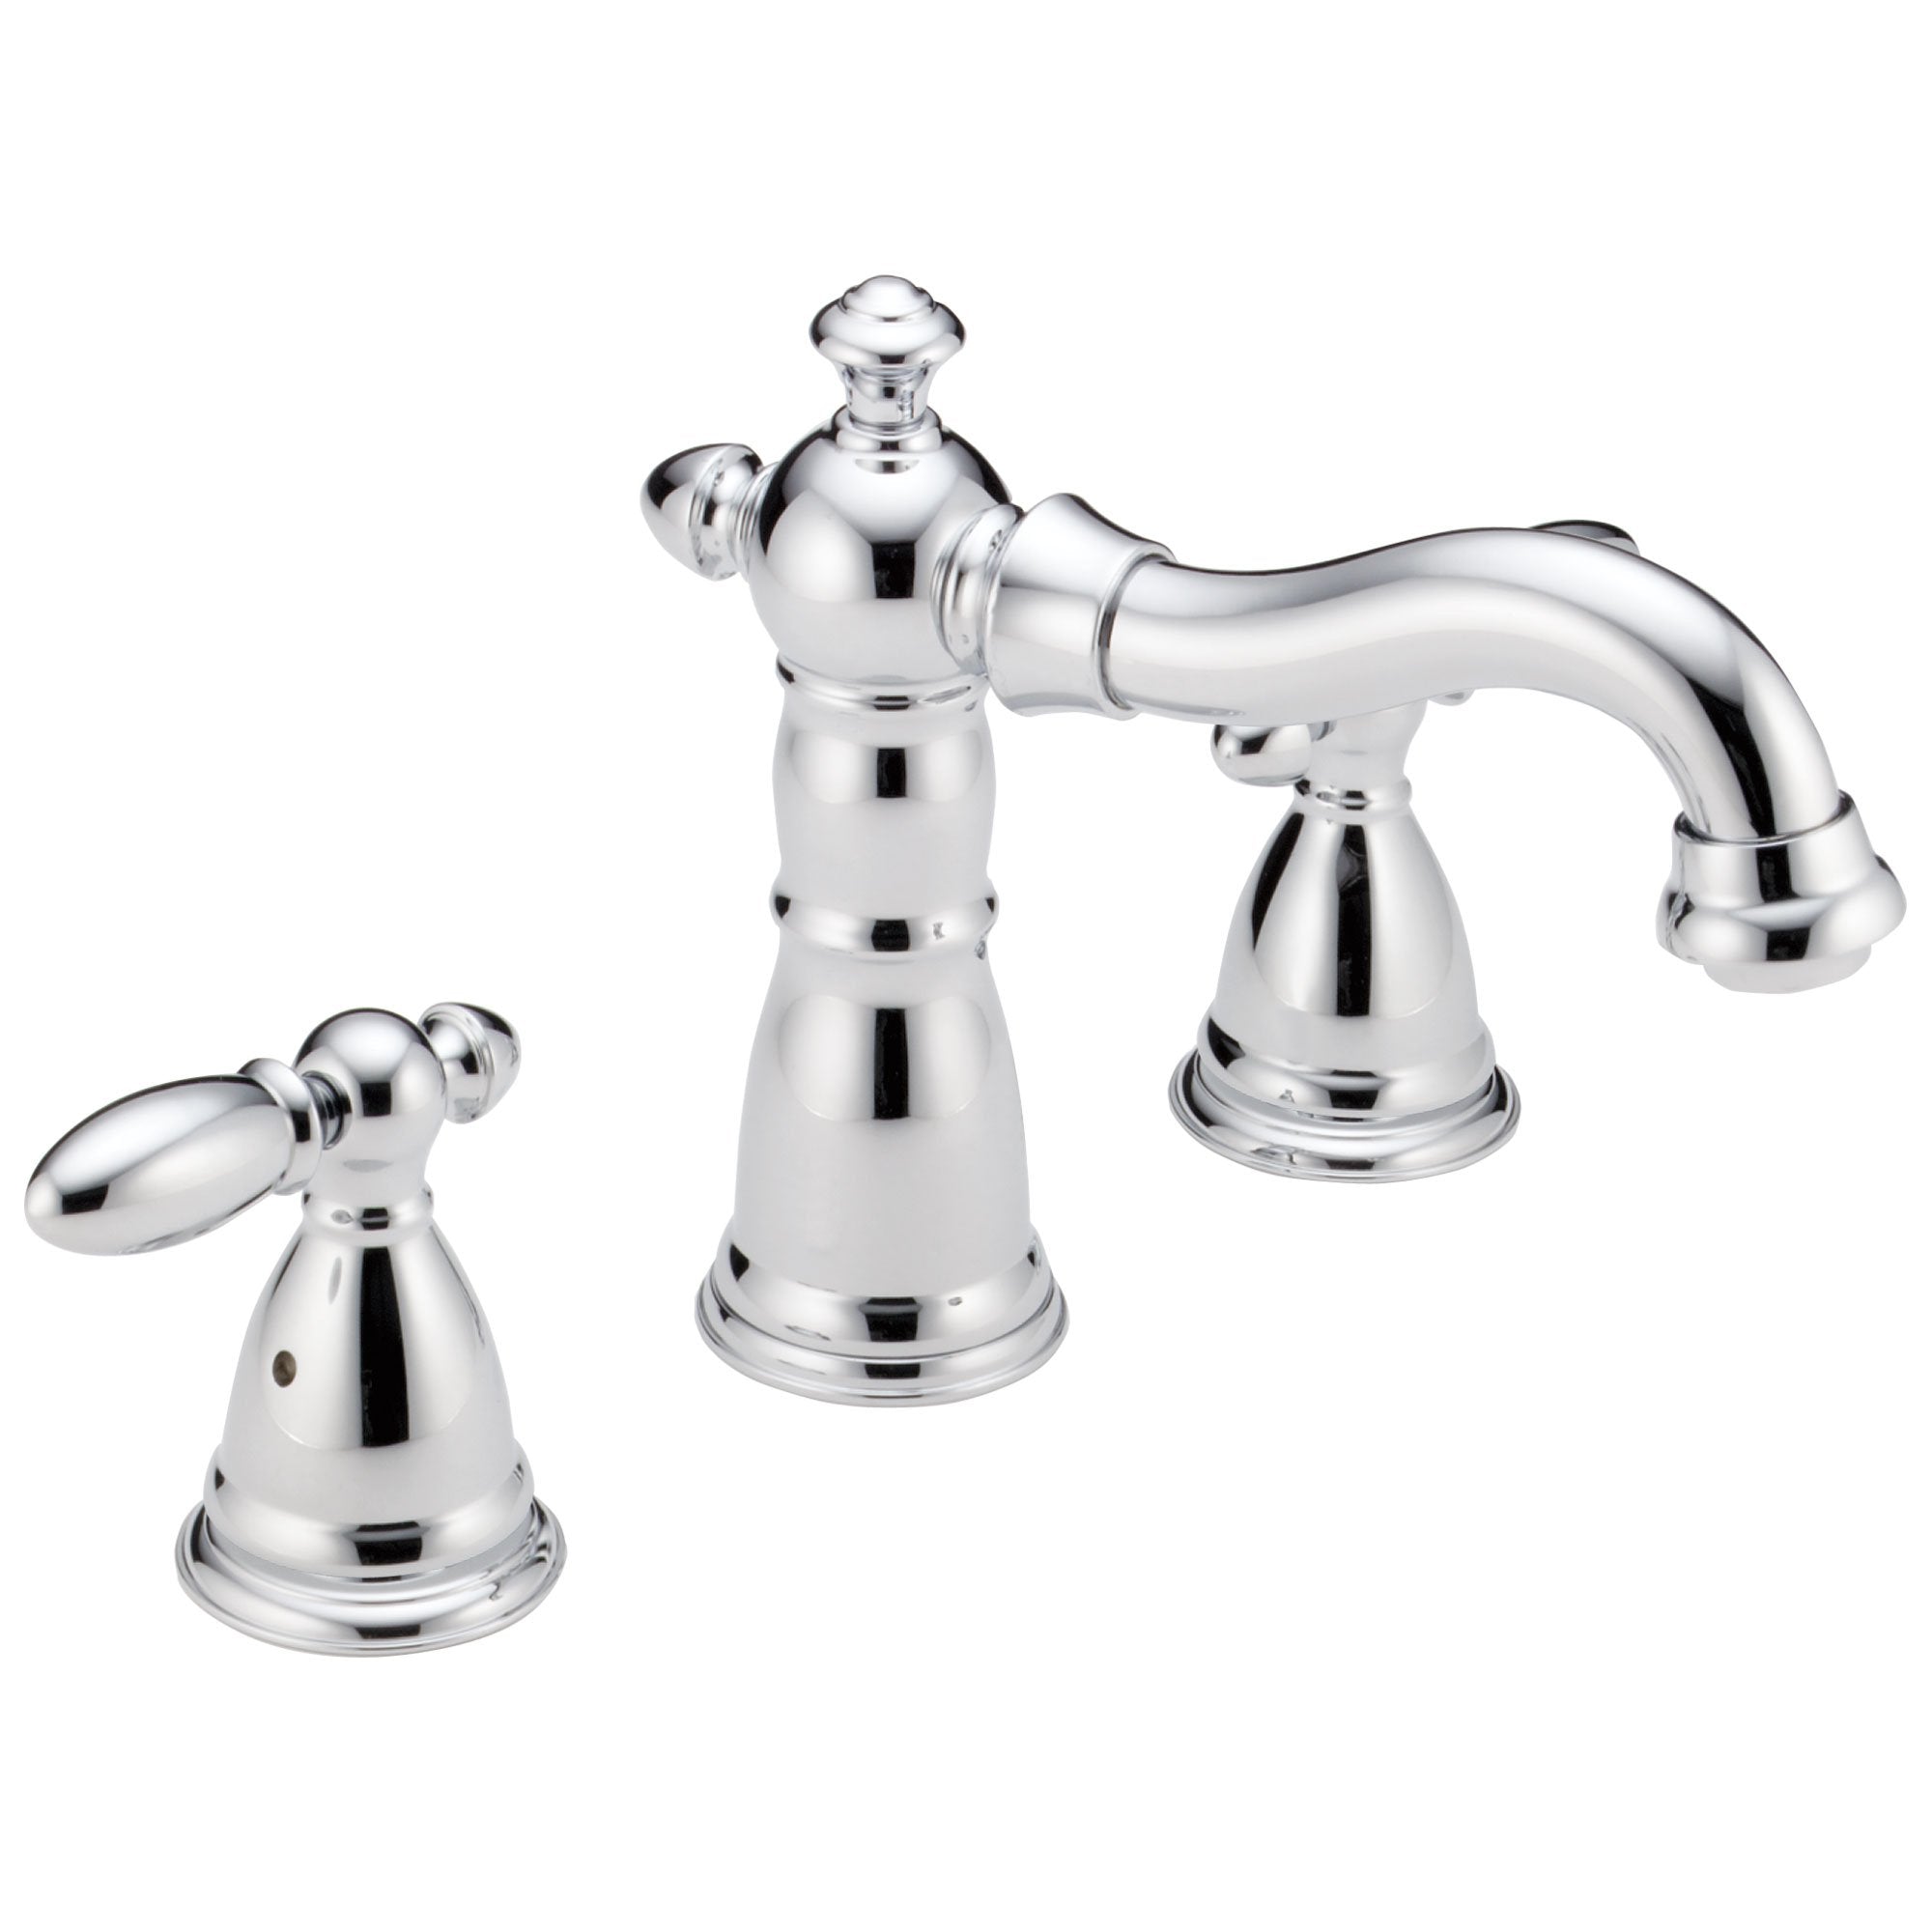 Delta Victorian Collection Chrome Finish Traditional Roman Tub Filler Faucet COMPLETE ITEM Includes (2) Lever Handles and Rough-in Valve D1461V